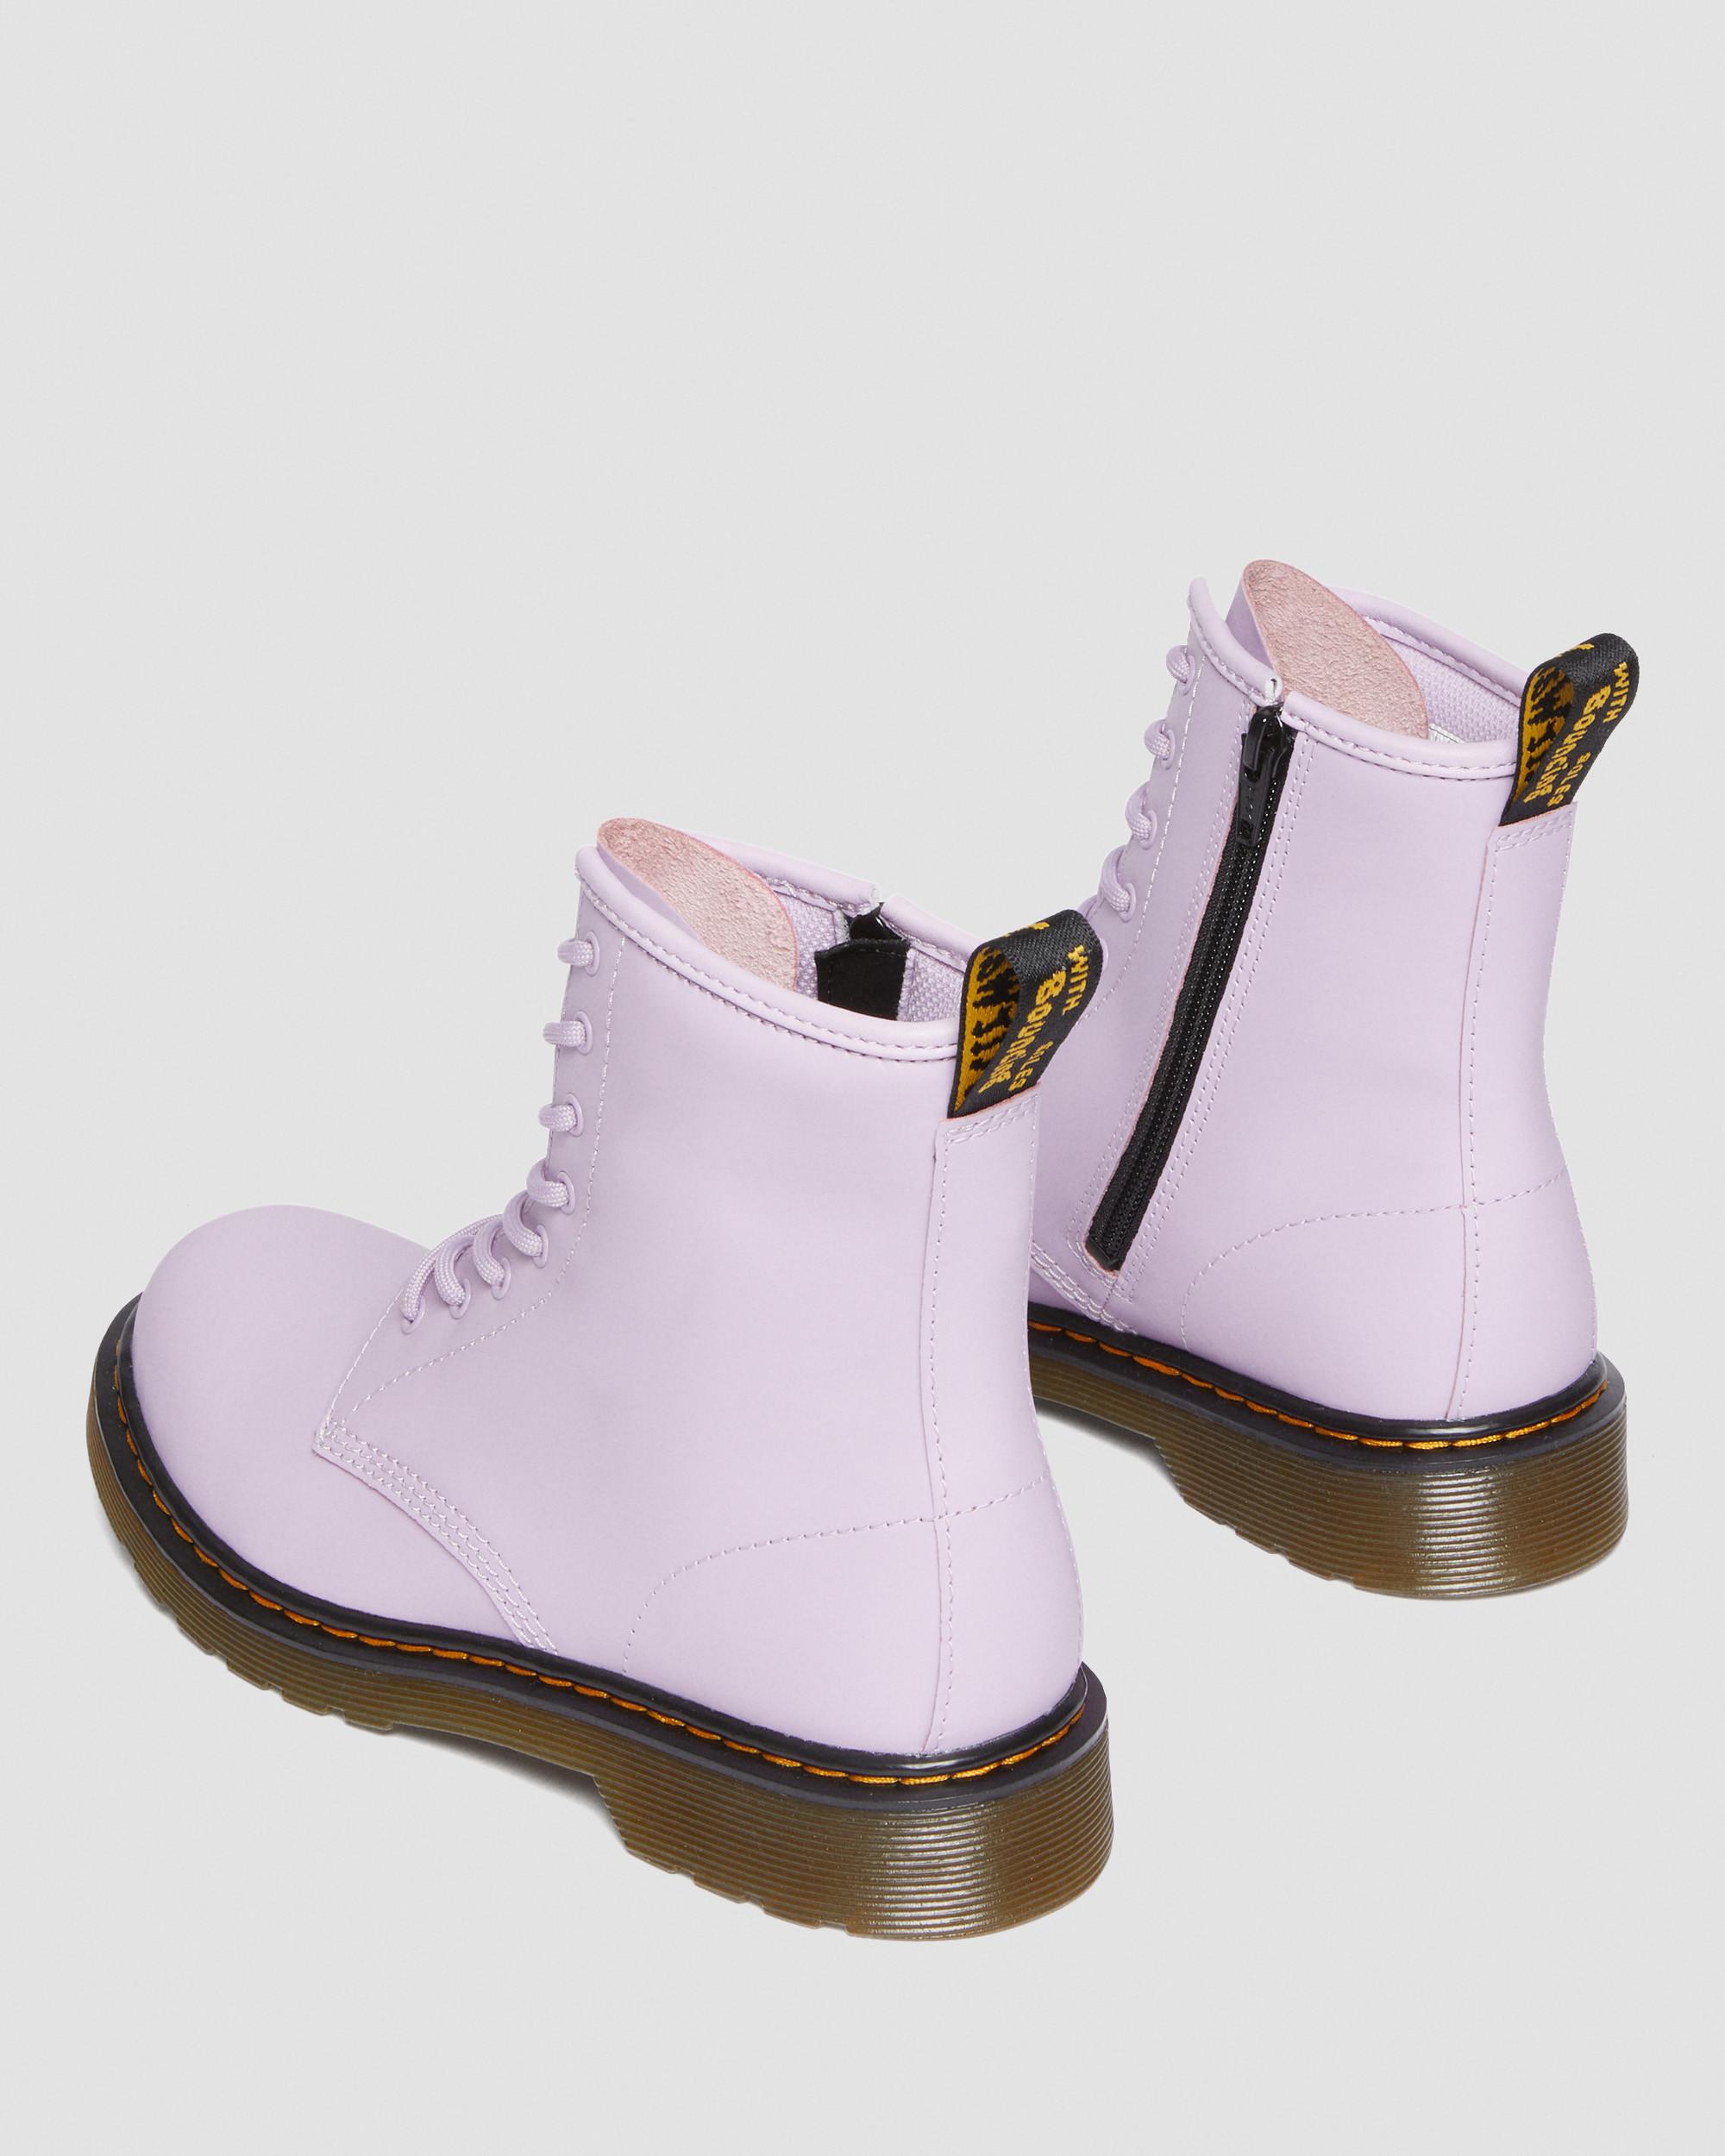 Youth 1460 Romario Leather | Boots Martens Up Dr. in Lace Lilac